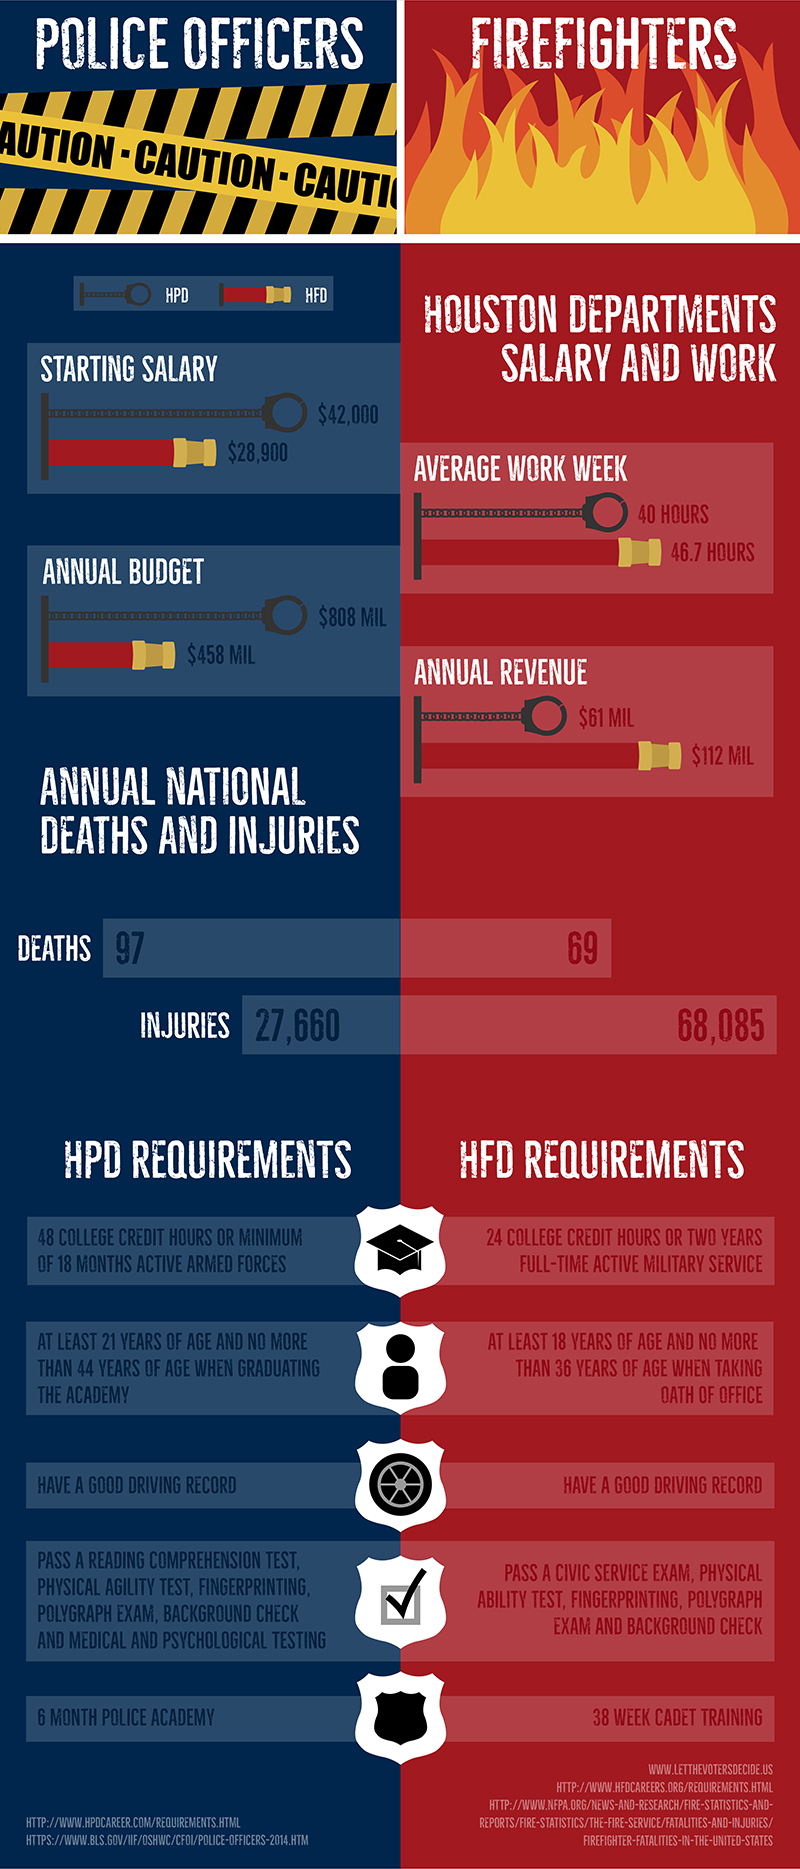 GRAPHIC: An infographic comparison of police officer and firefighter statistics. Graphic created by The Signal online editor, Krista Kamp.